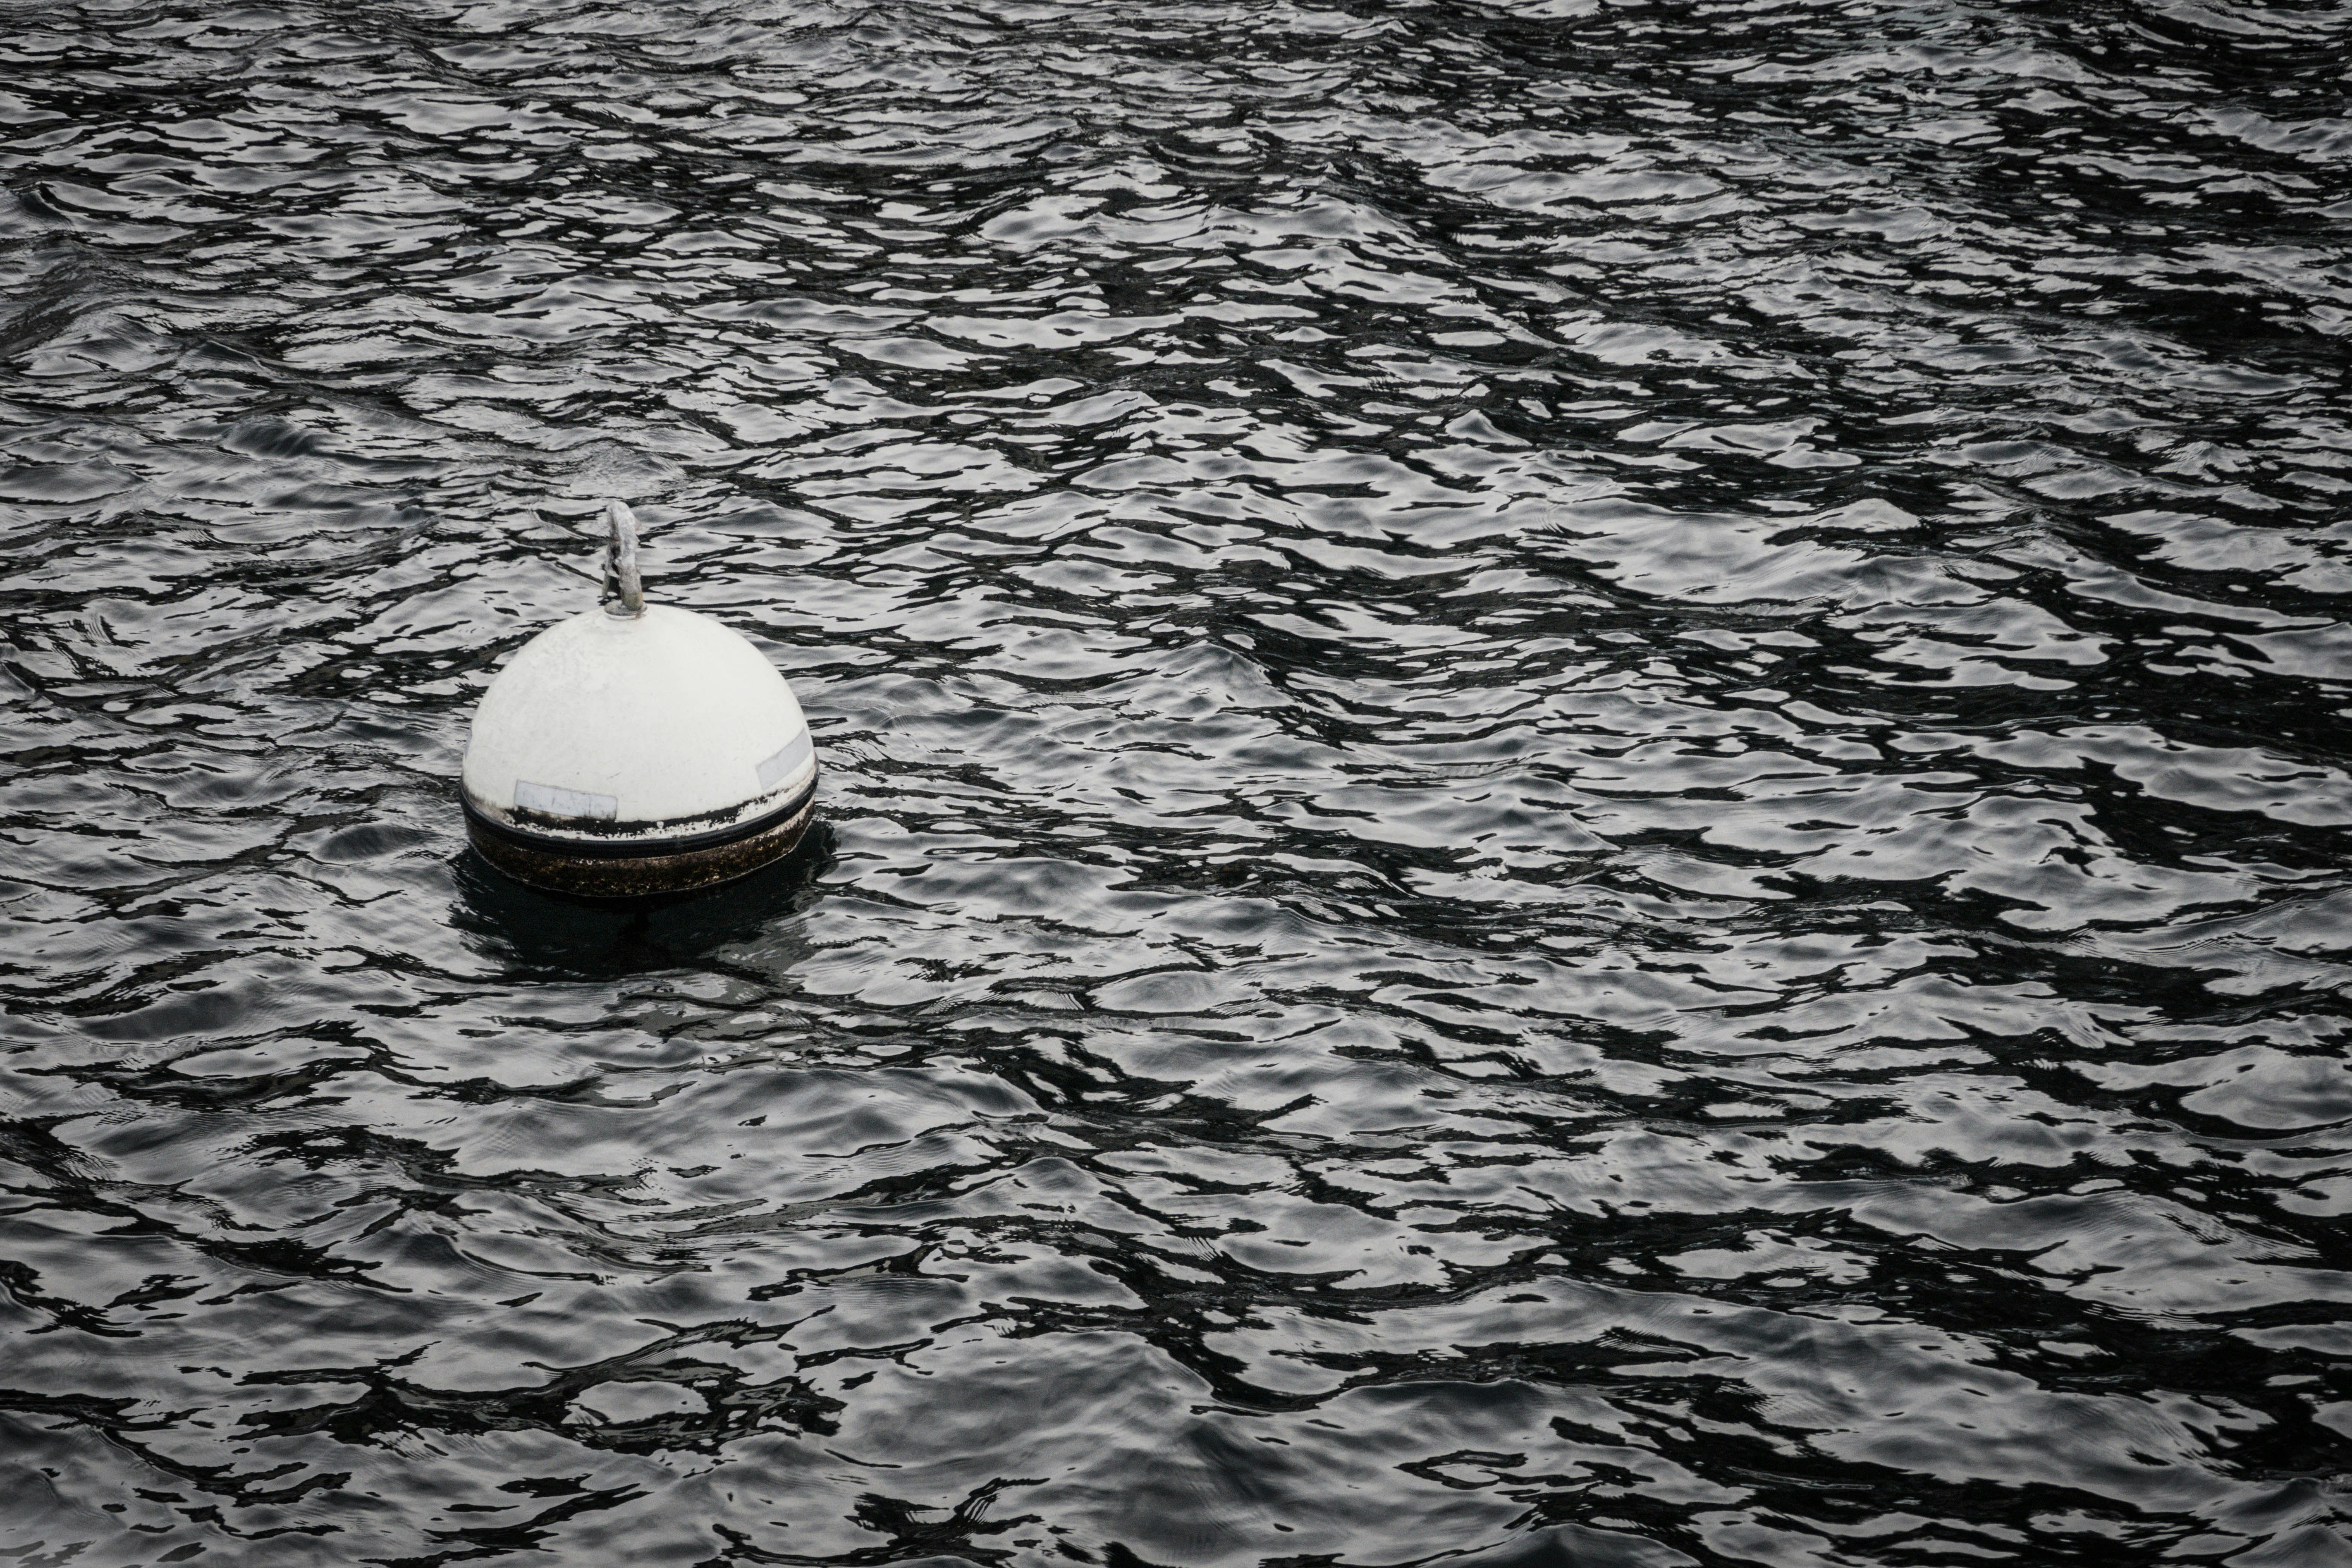 greyscale photo of bouy floating on body of water